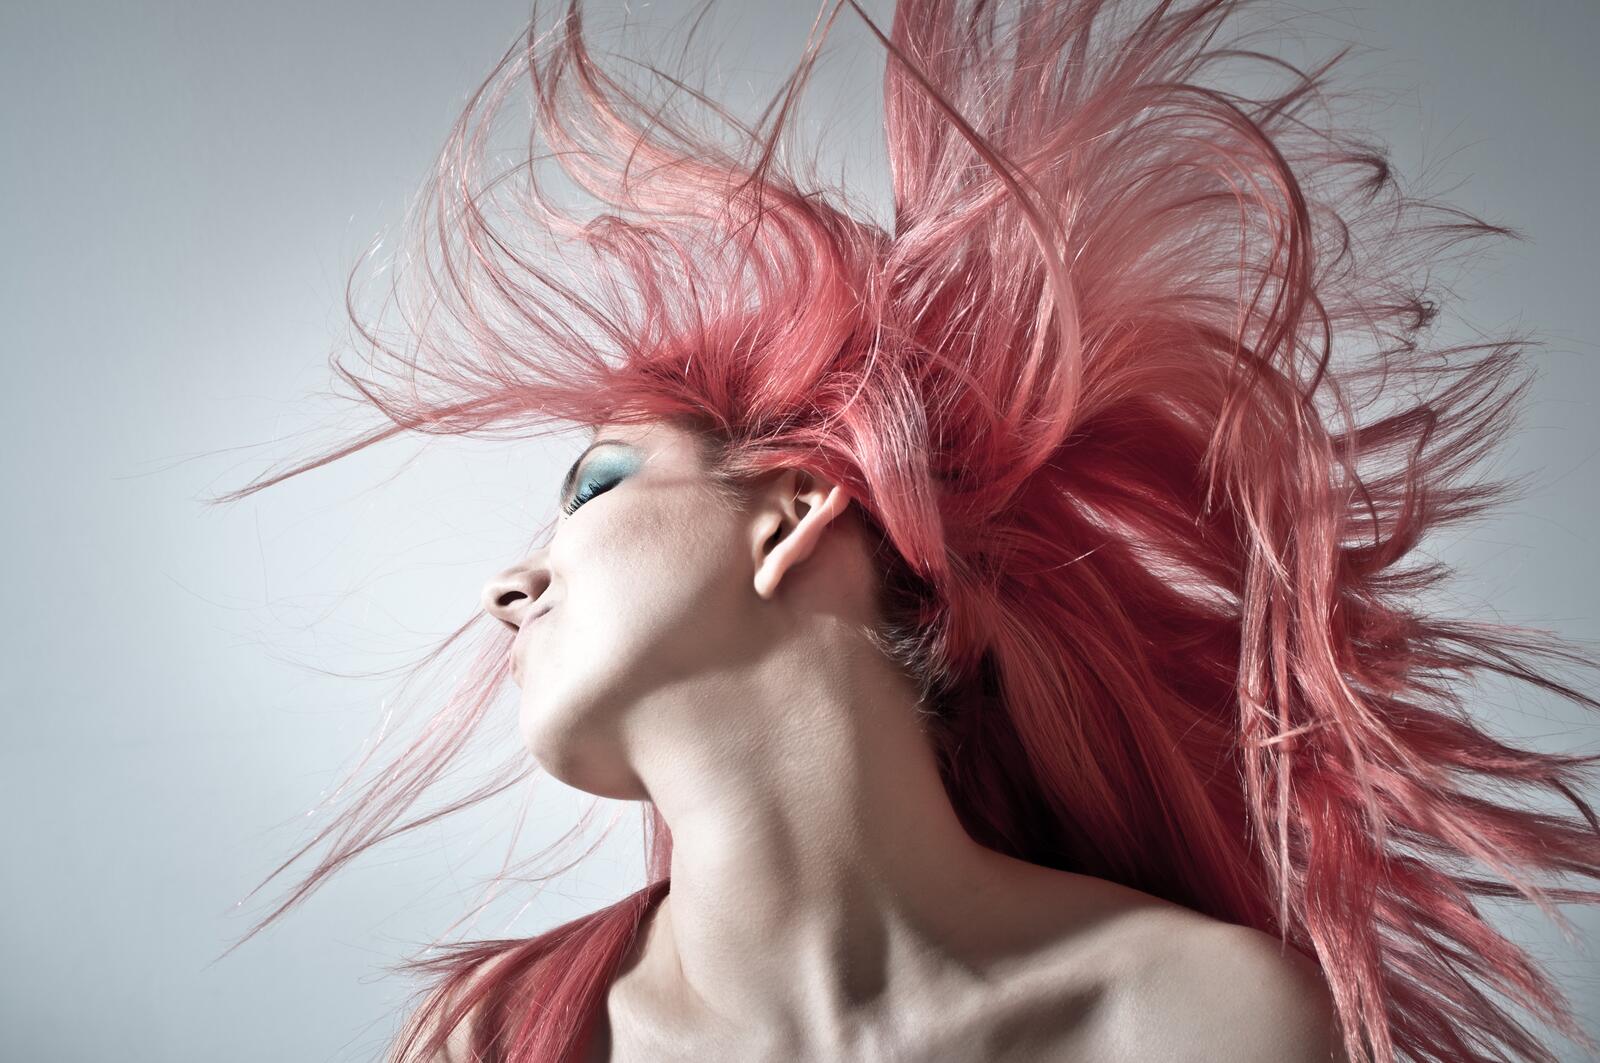 Free photo A girl with red hair blowing in the wind